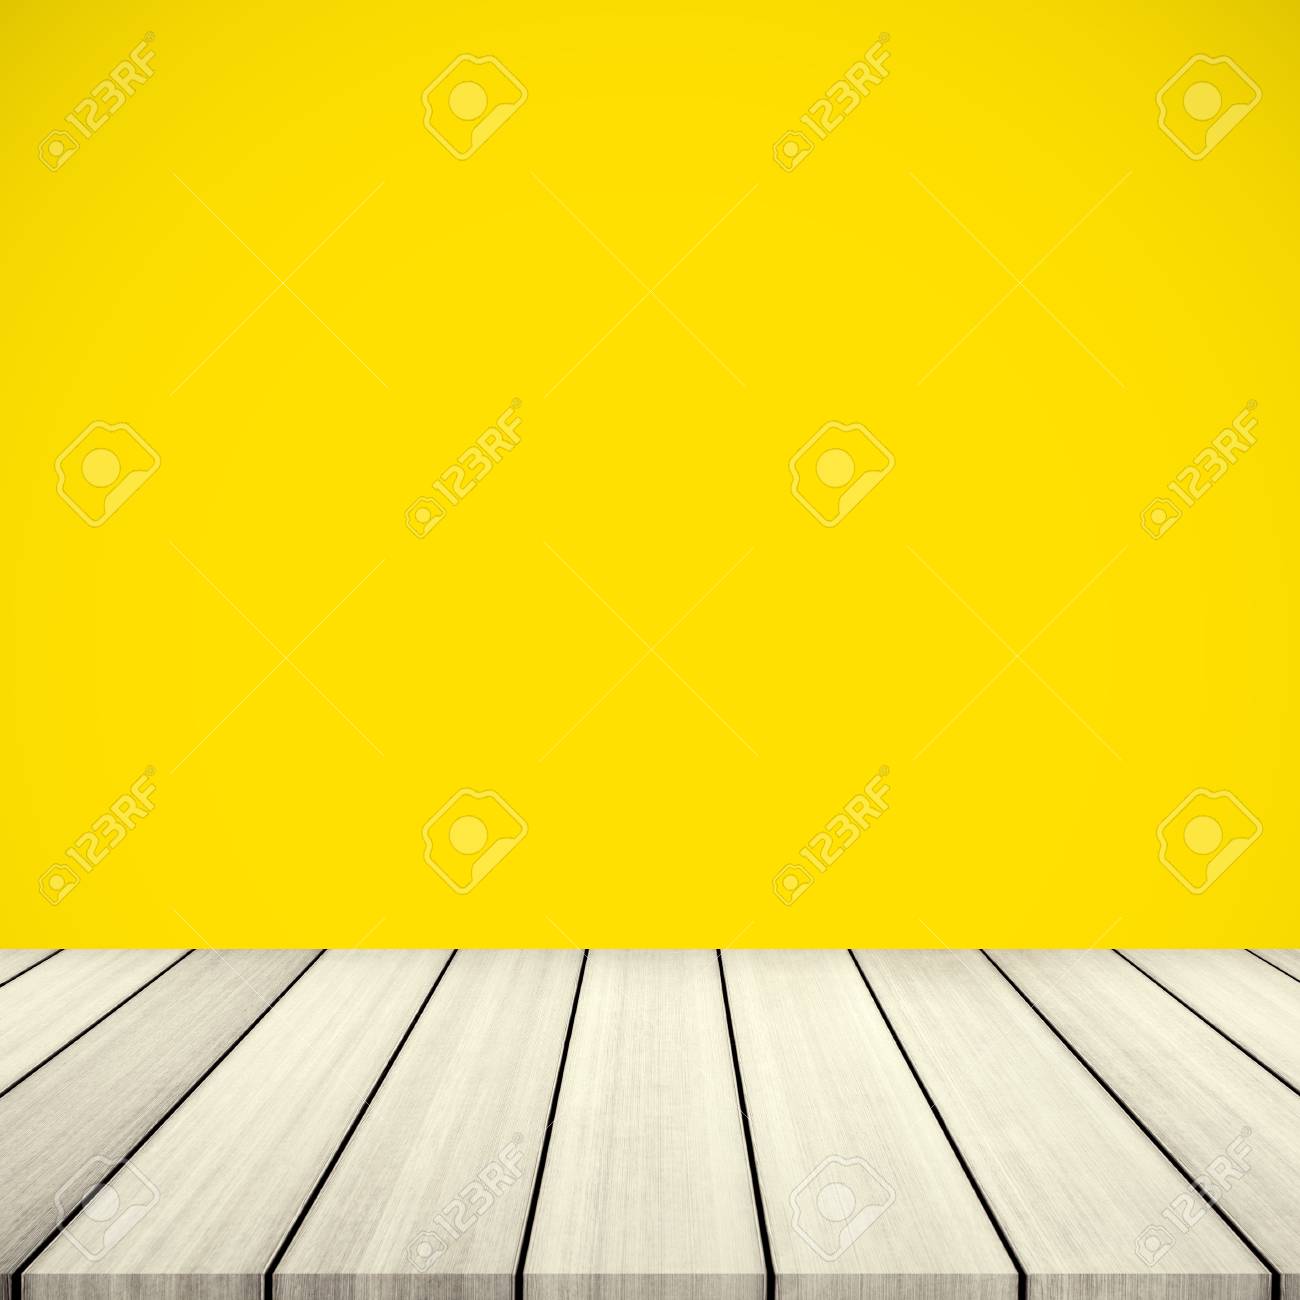 Empty Wooden Deck Table Over Yellow Wallpaper Background Stock